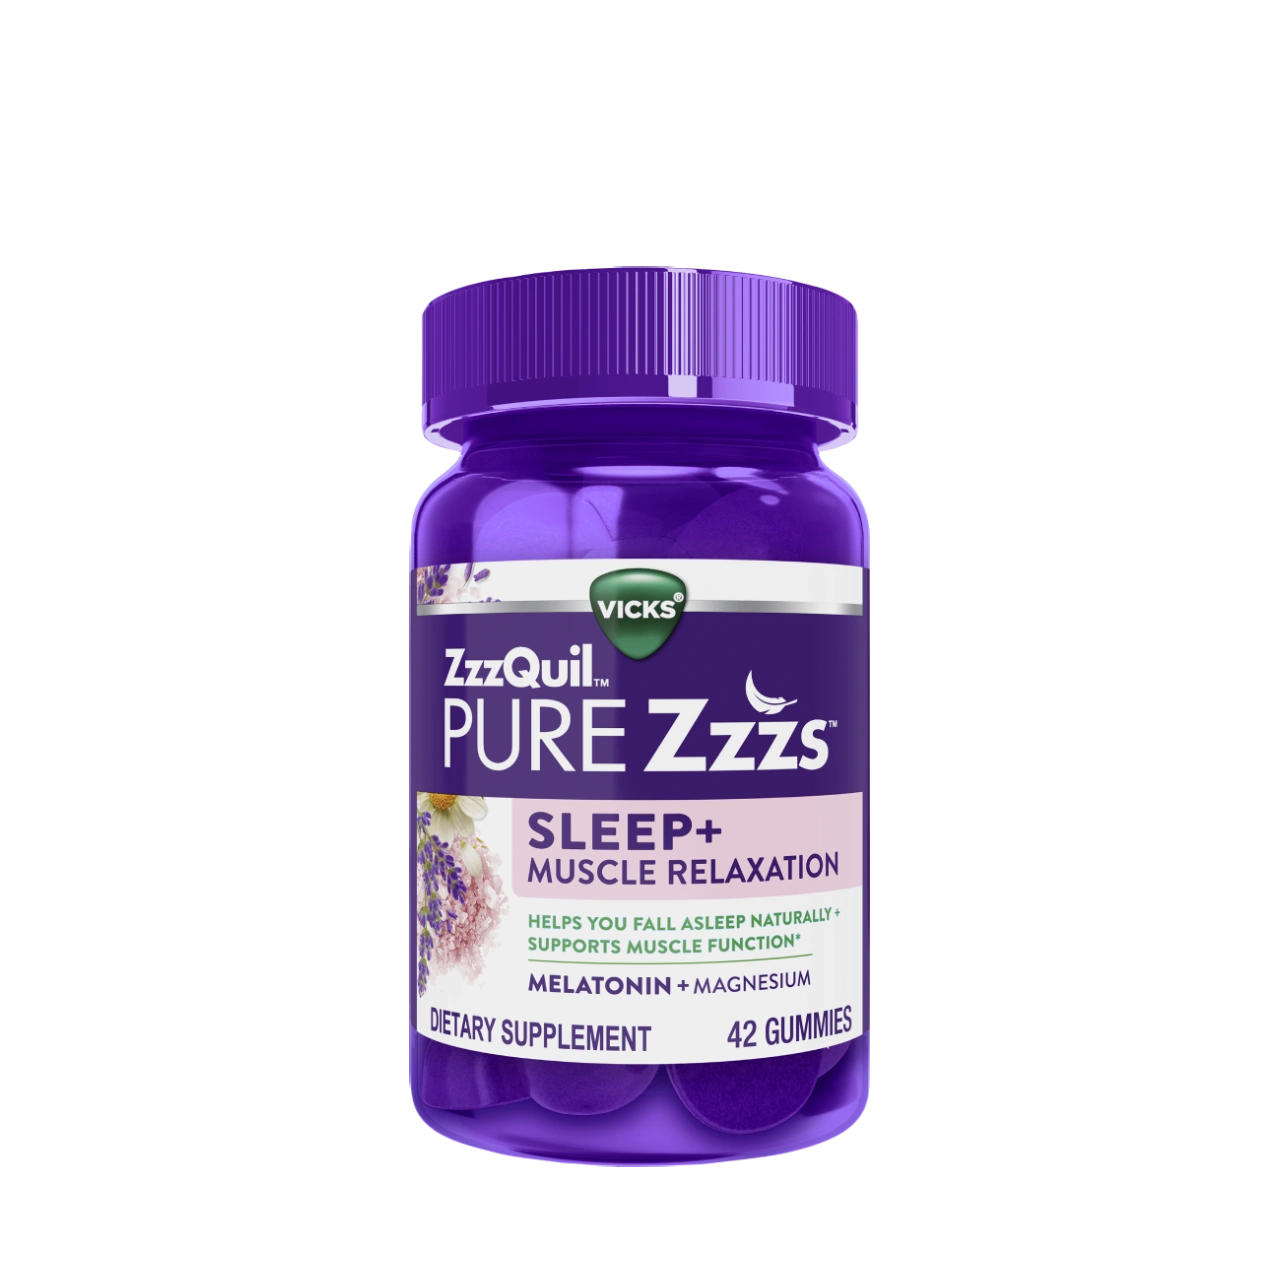 ZzzQuil PURE Zzzs Muscle Relaxation Melatonin Sleep Aid Gummies | ZzzQuil